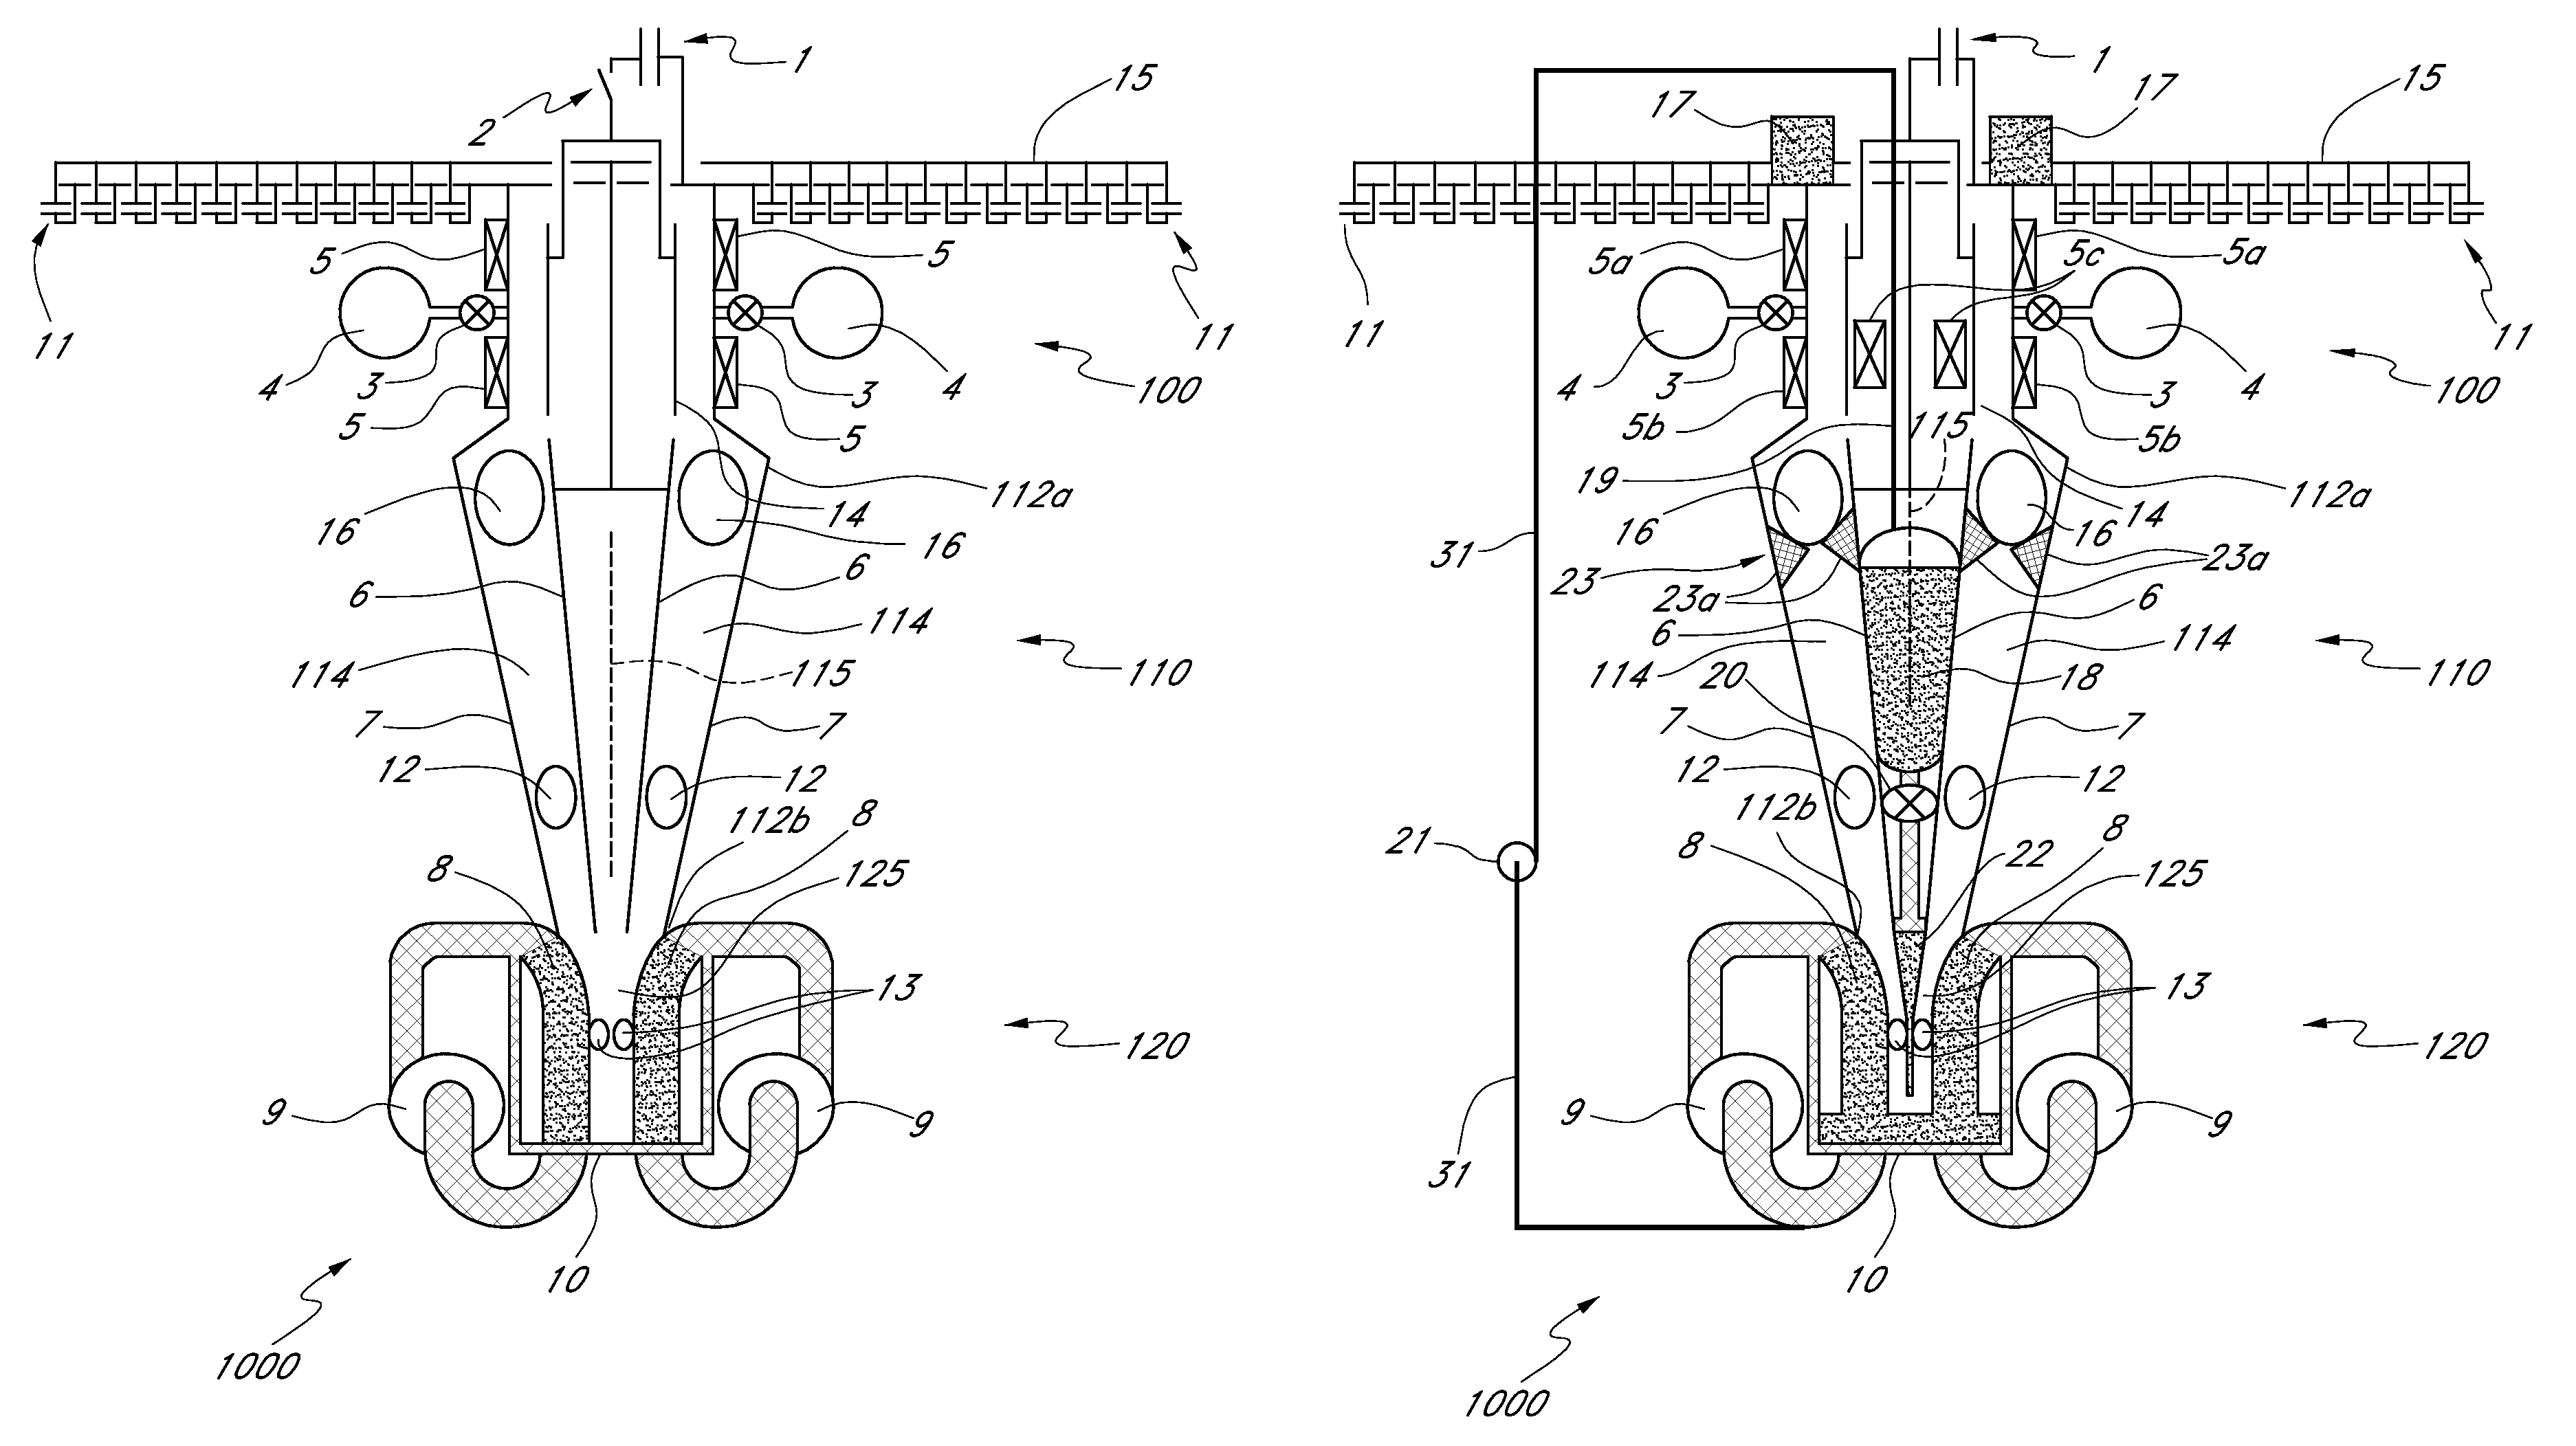 Systems and methods for compressing plasma